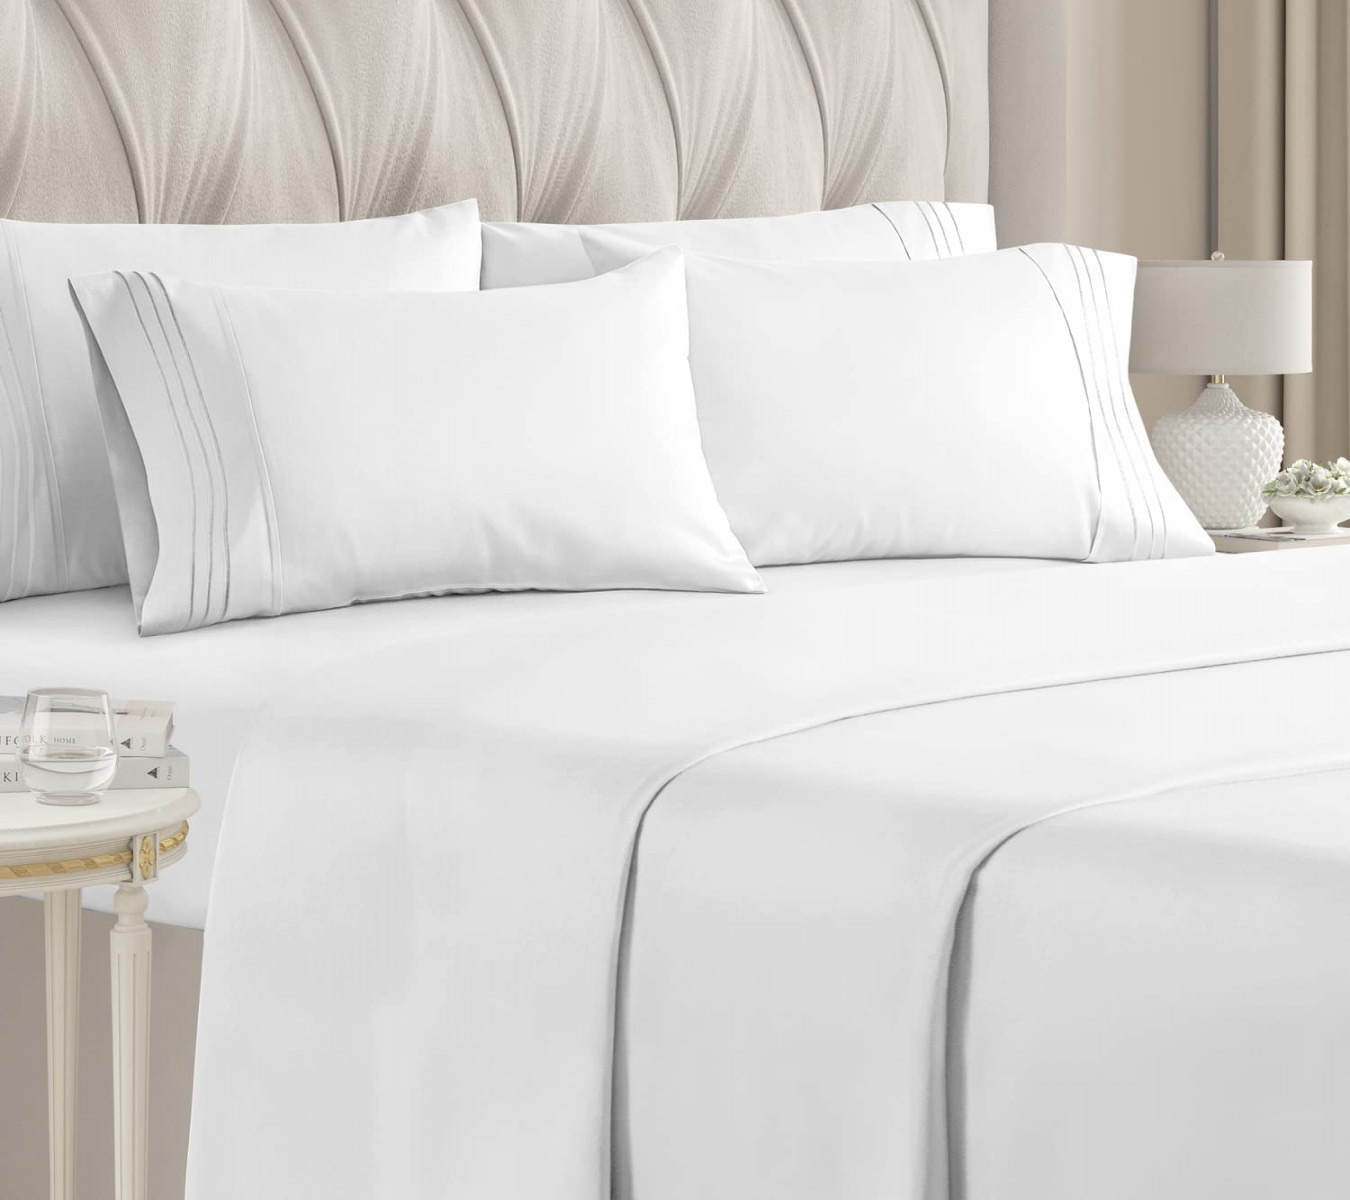 Double Bed Bed Sheet Set – White with Fitted Sheet &  Pillow/Extra Deep  Pockets Microfibre Soft as Egyptian Cotton Hotel Luxury Collection Bedding